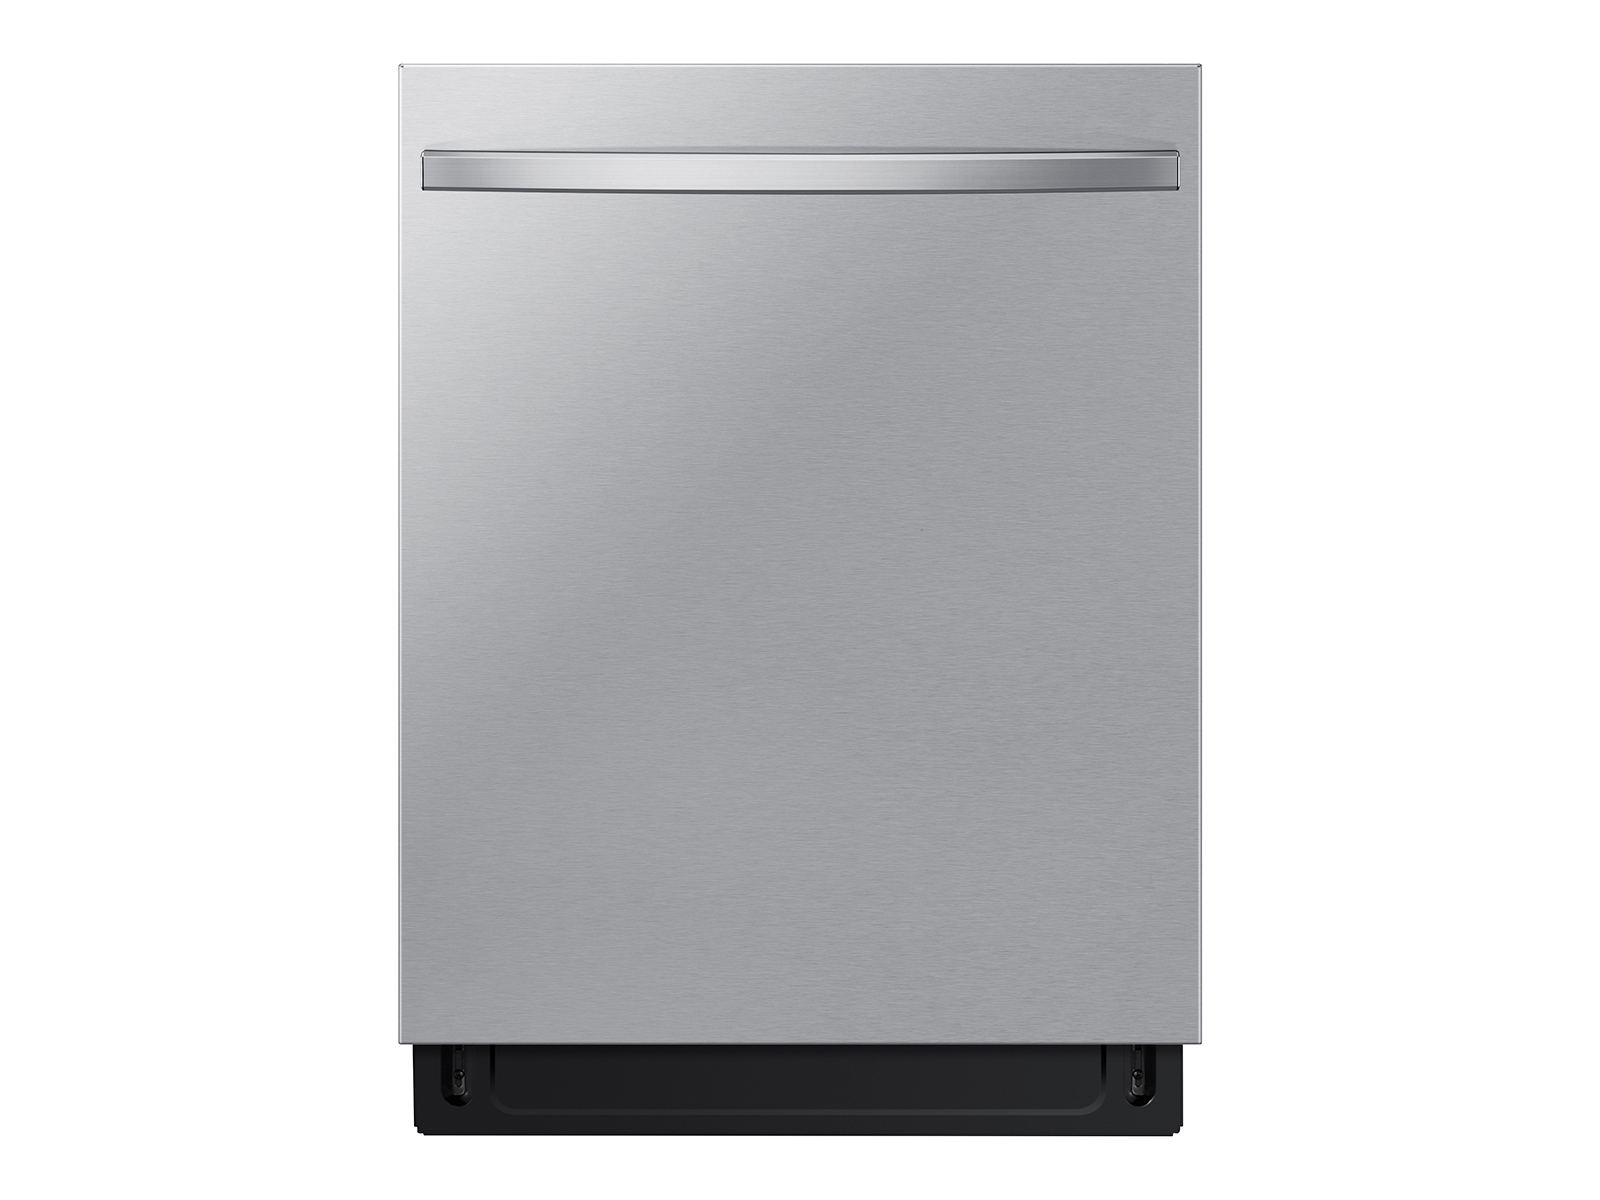 Thumbnail image of AutoRelease Smart 46dBA Dishwasher with StormWash™ in Fingerprint Resistant Stainless Steel